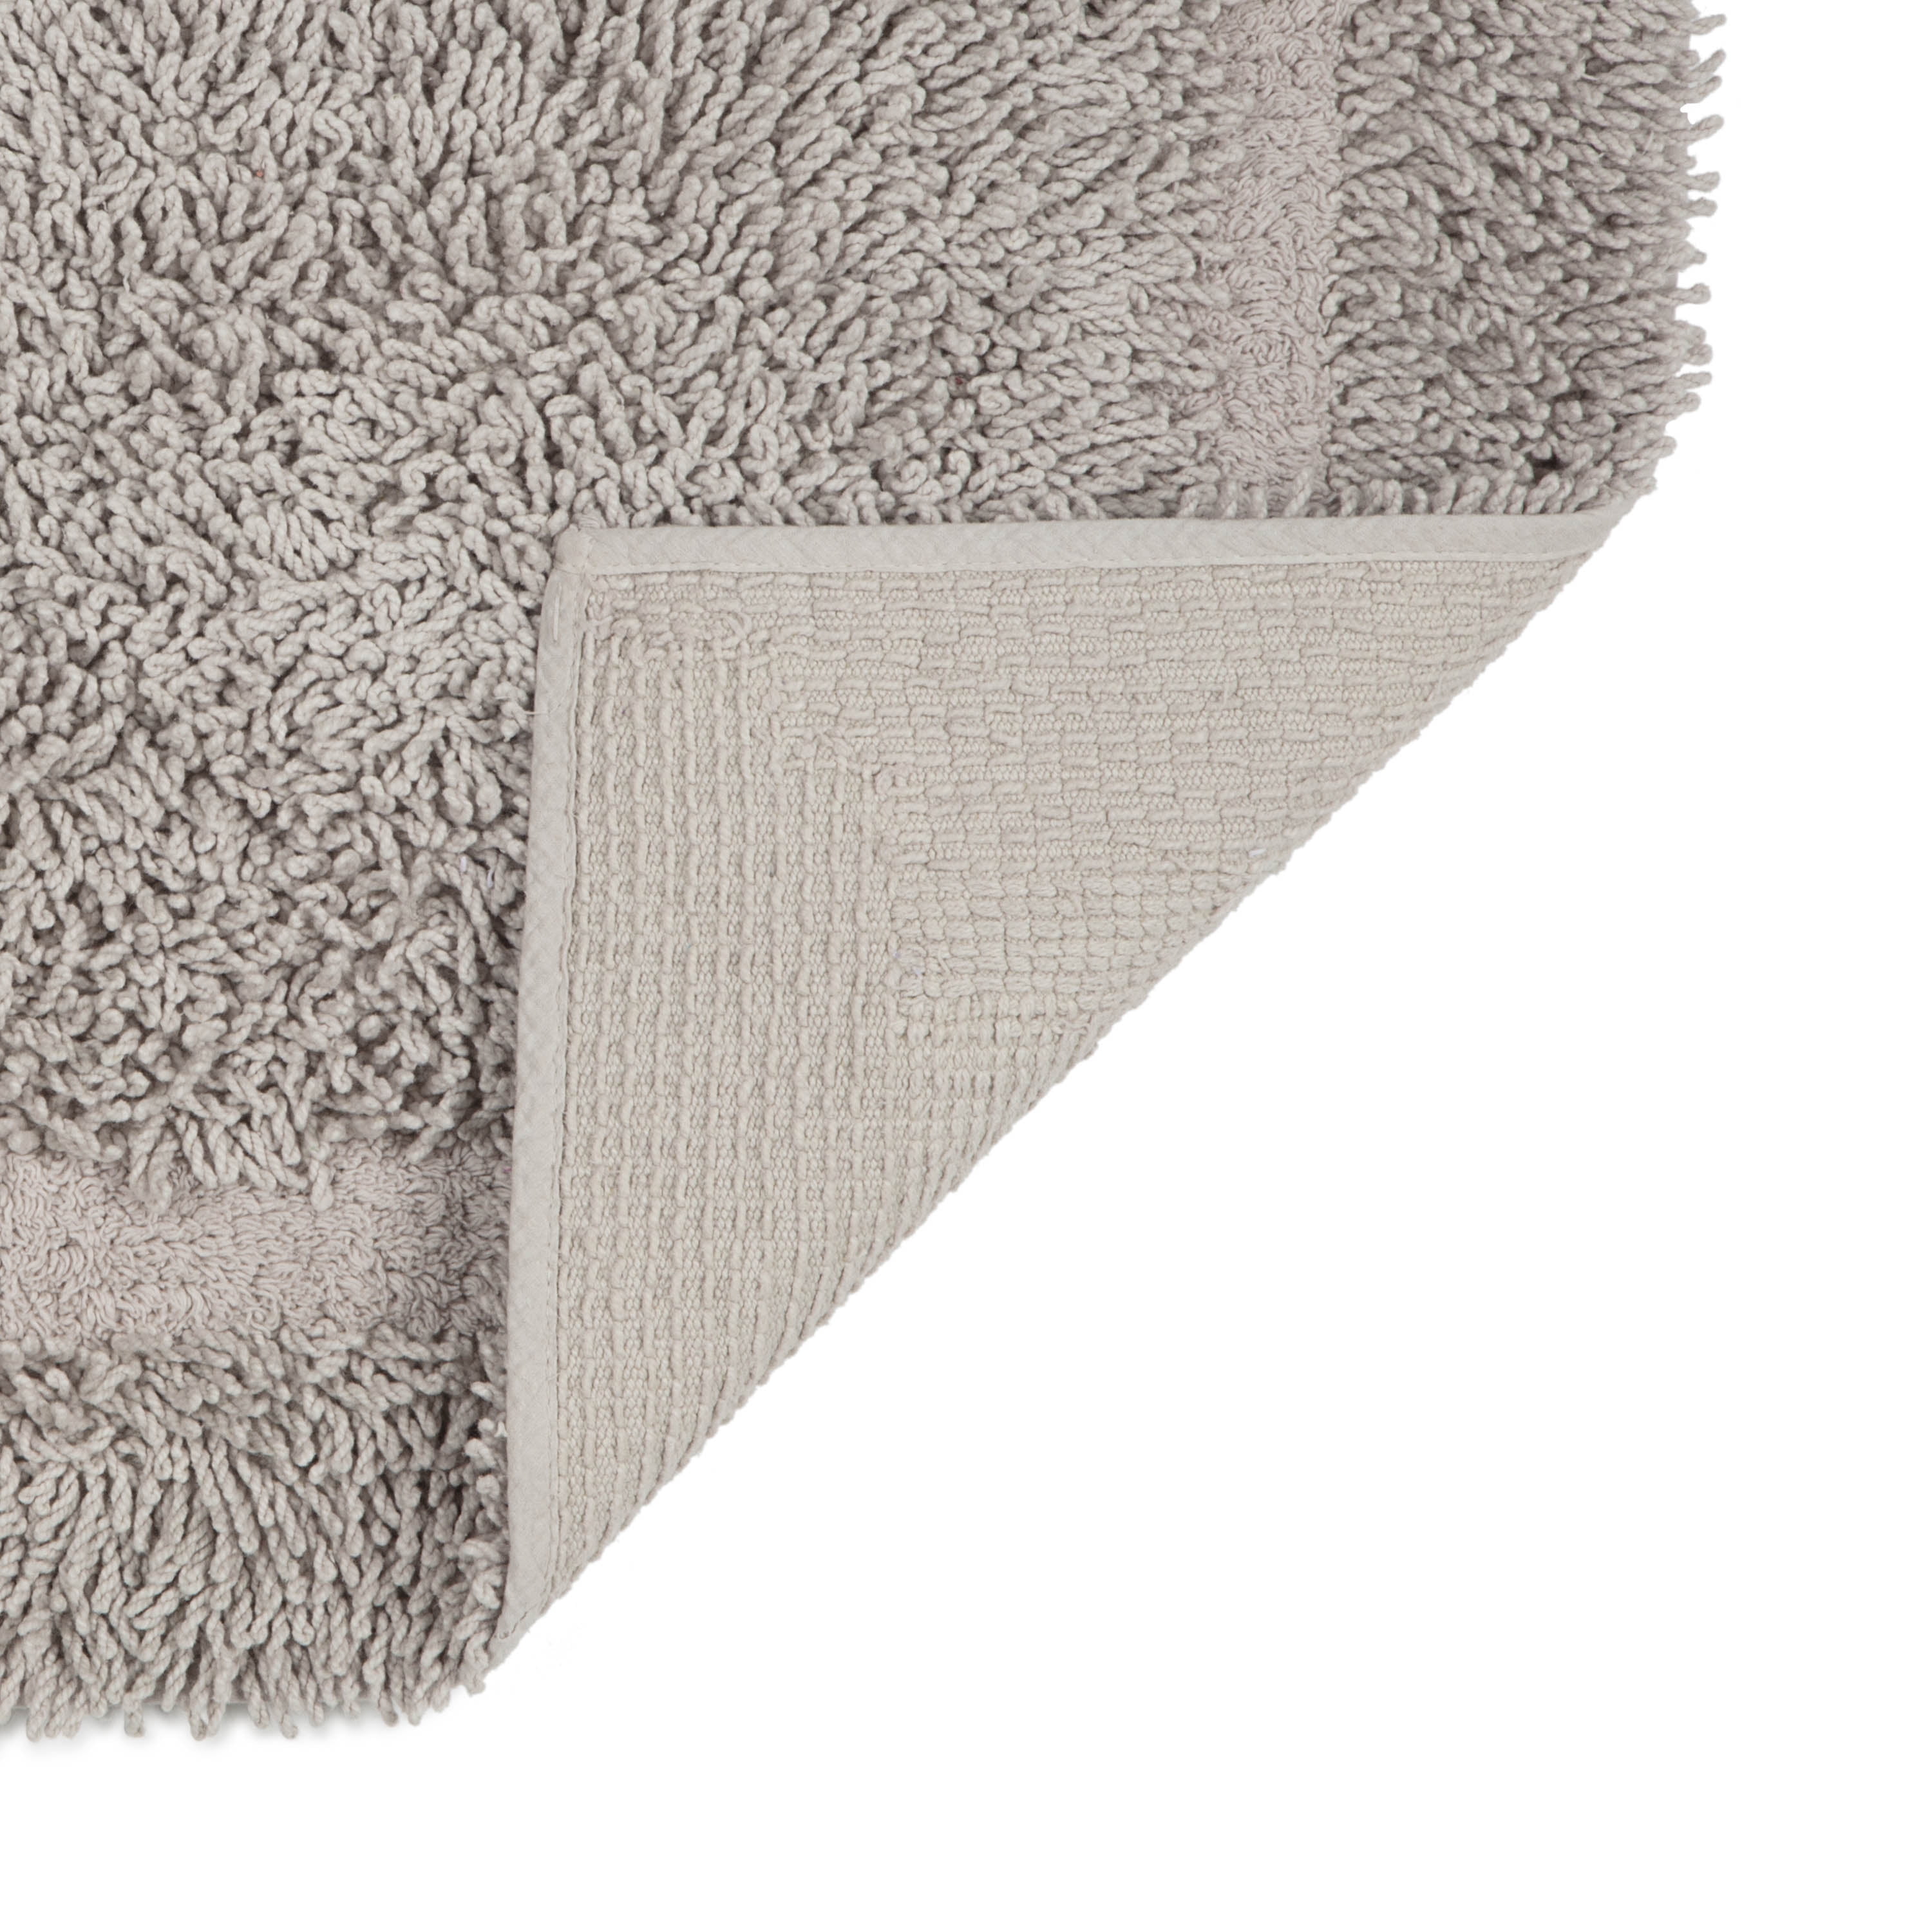 Rubber Mats For Bathroom – Radiant Exports, Company